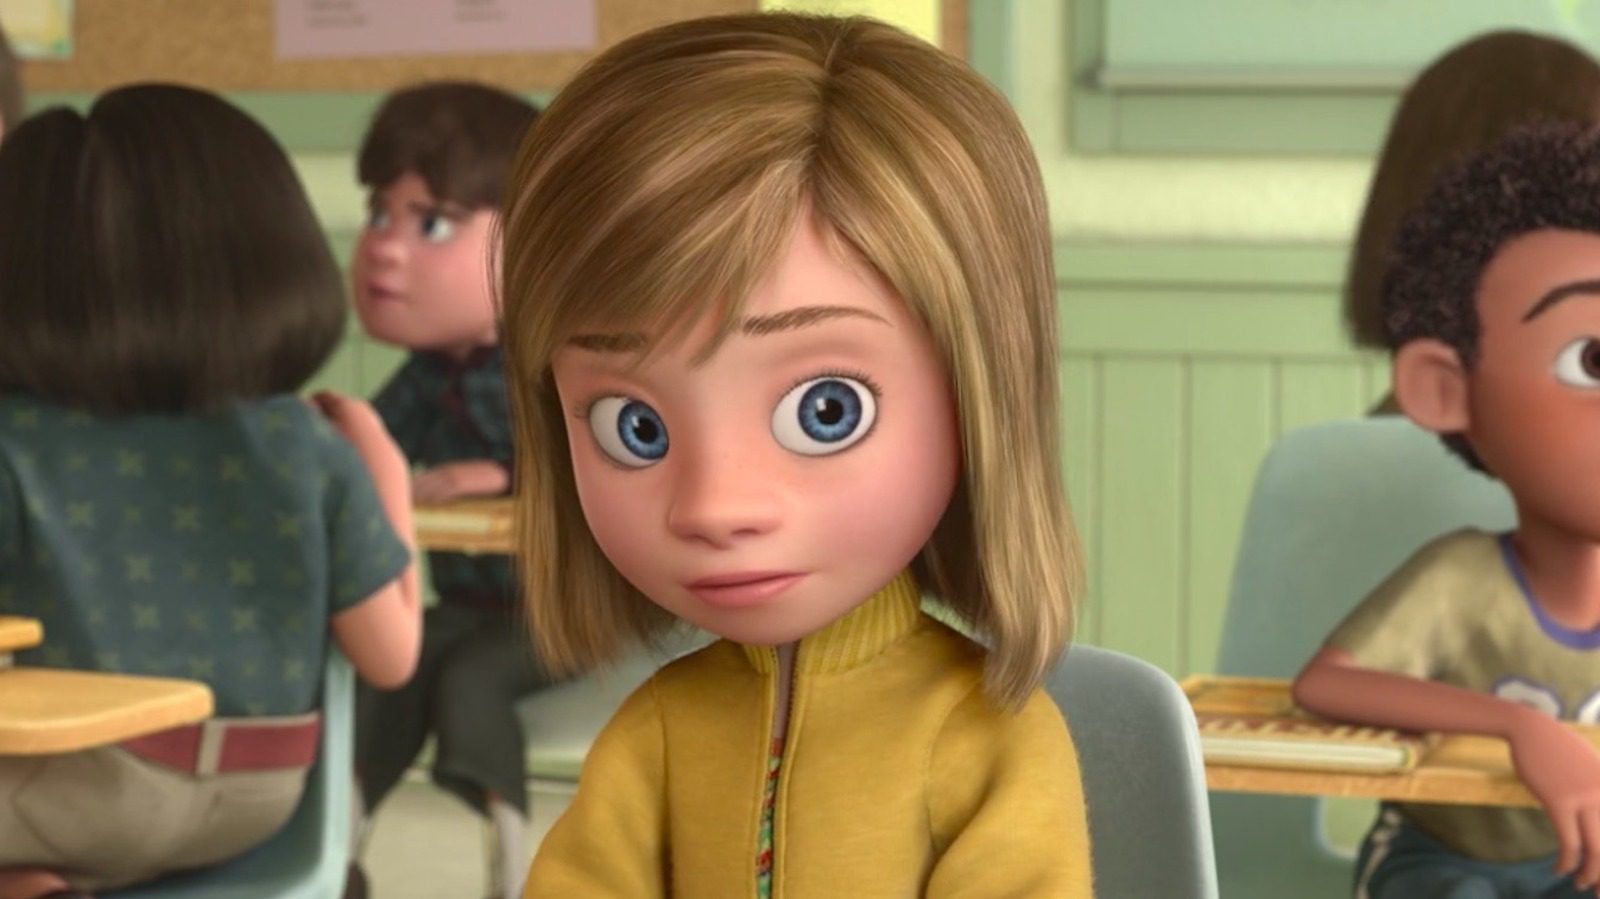 Inside Out 2 Will Fix A Major Flaw From The Original